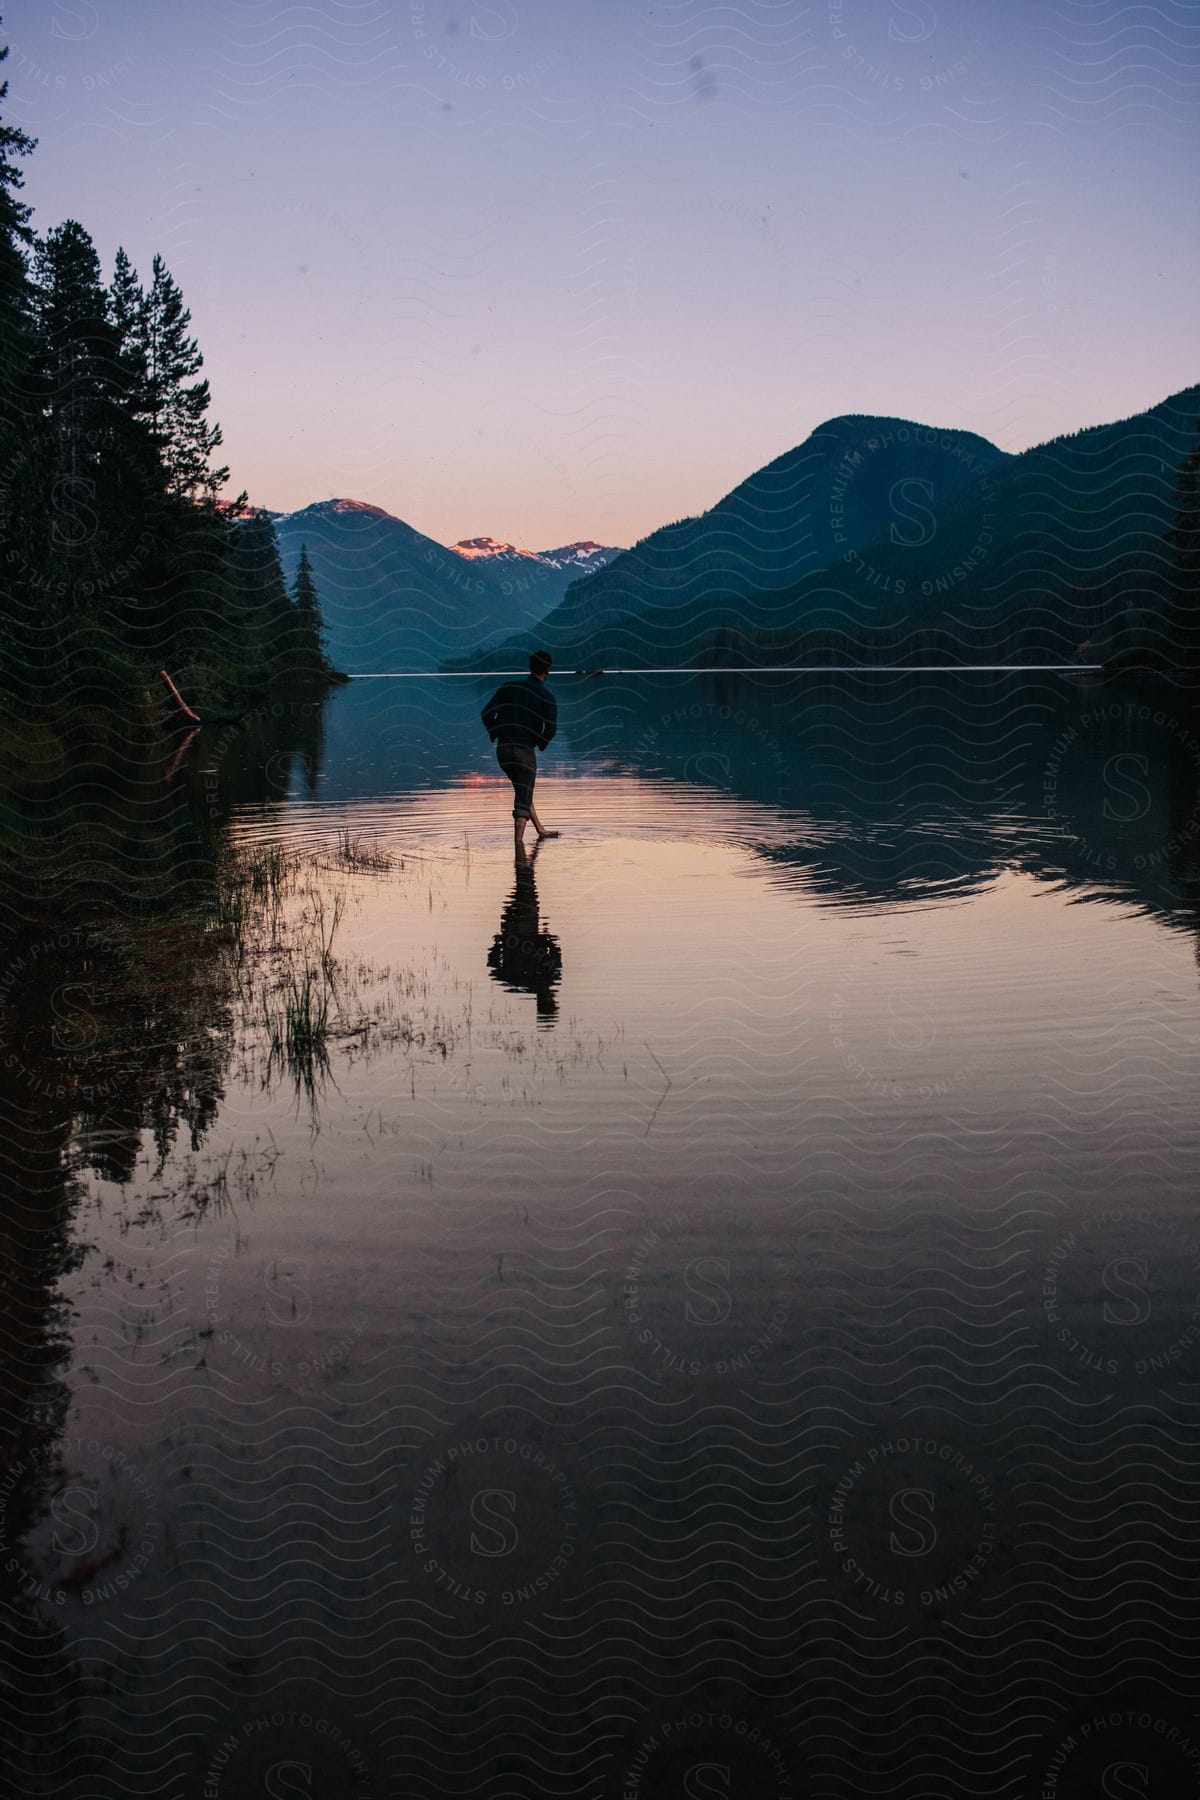 Man walking in serene lake is silhouetted against the mountain range and sky at sunset